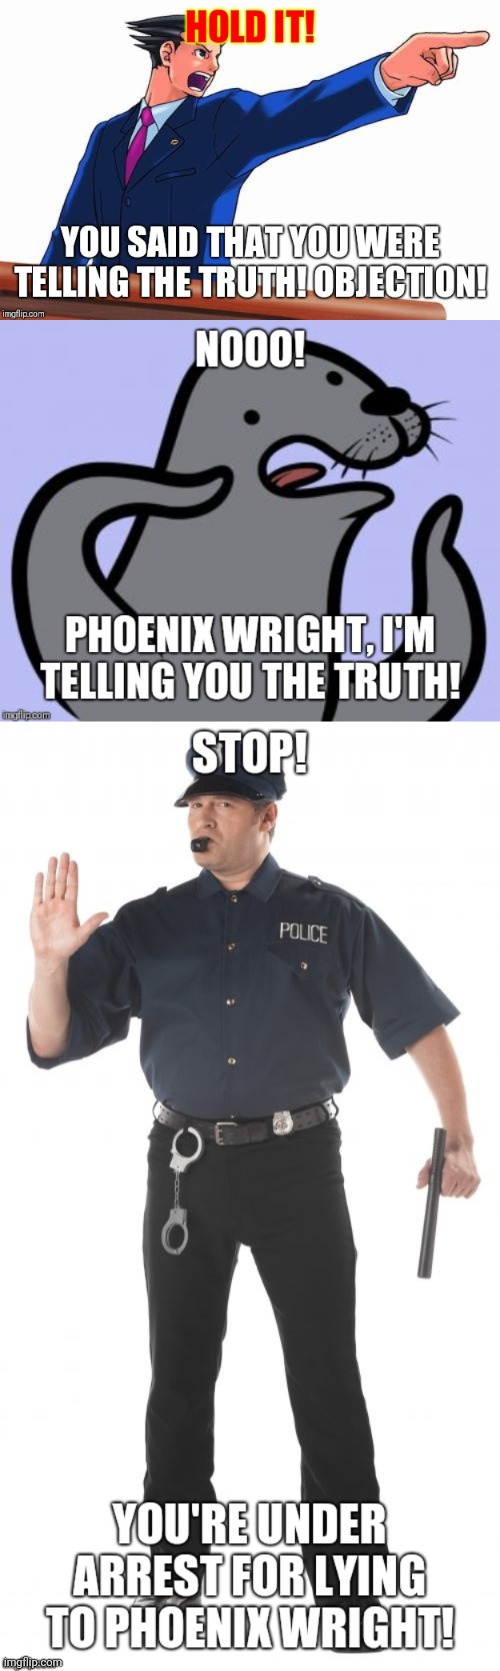 Lying to Phoenix Wright Is Against The Law | image tagged in phoenix wright,objection,homophobic seal,police,arrested,lying | made w/ Imgflip meme maker